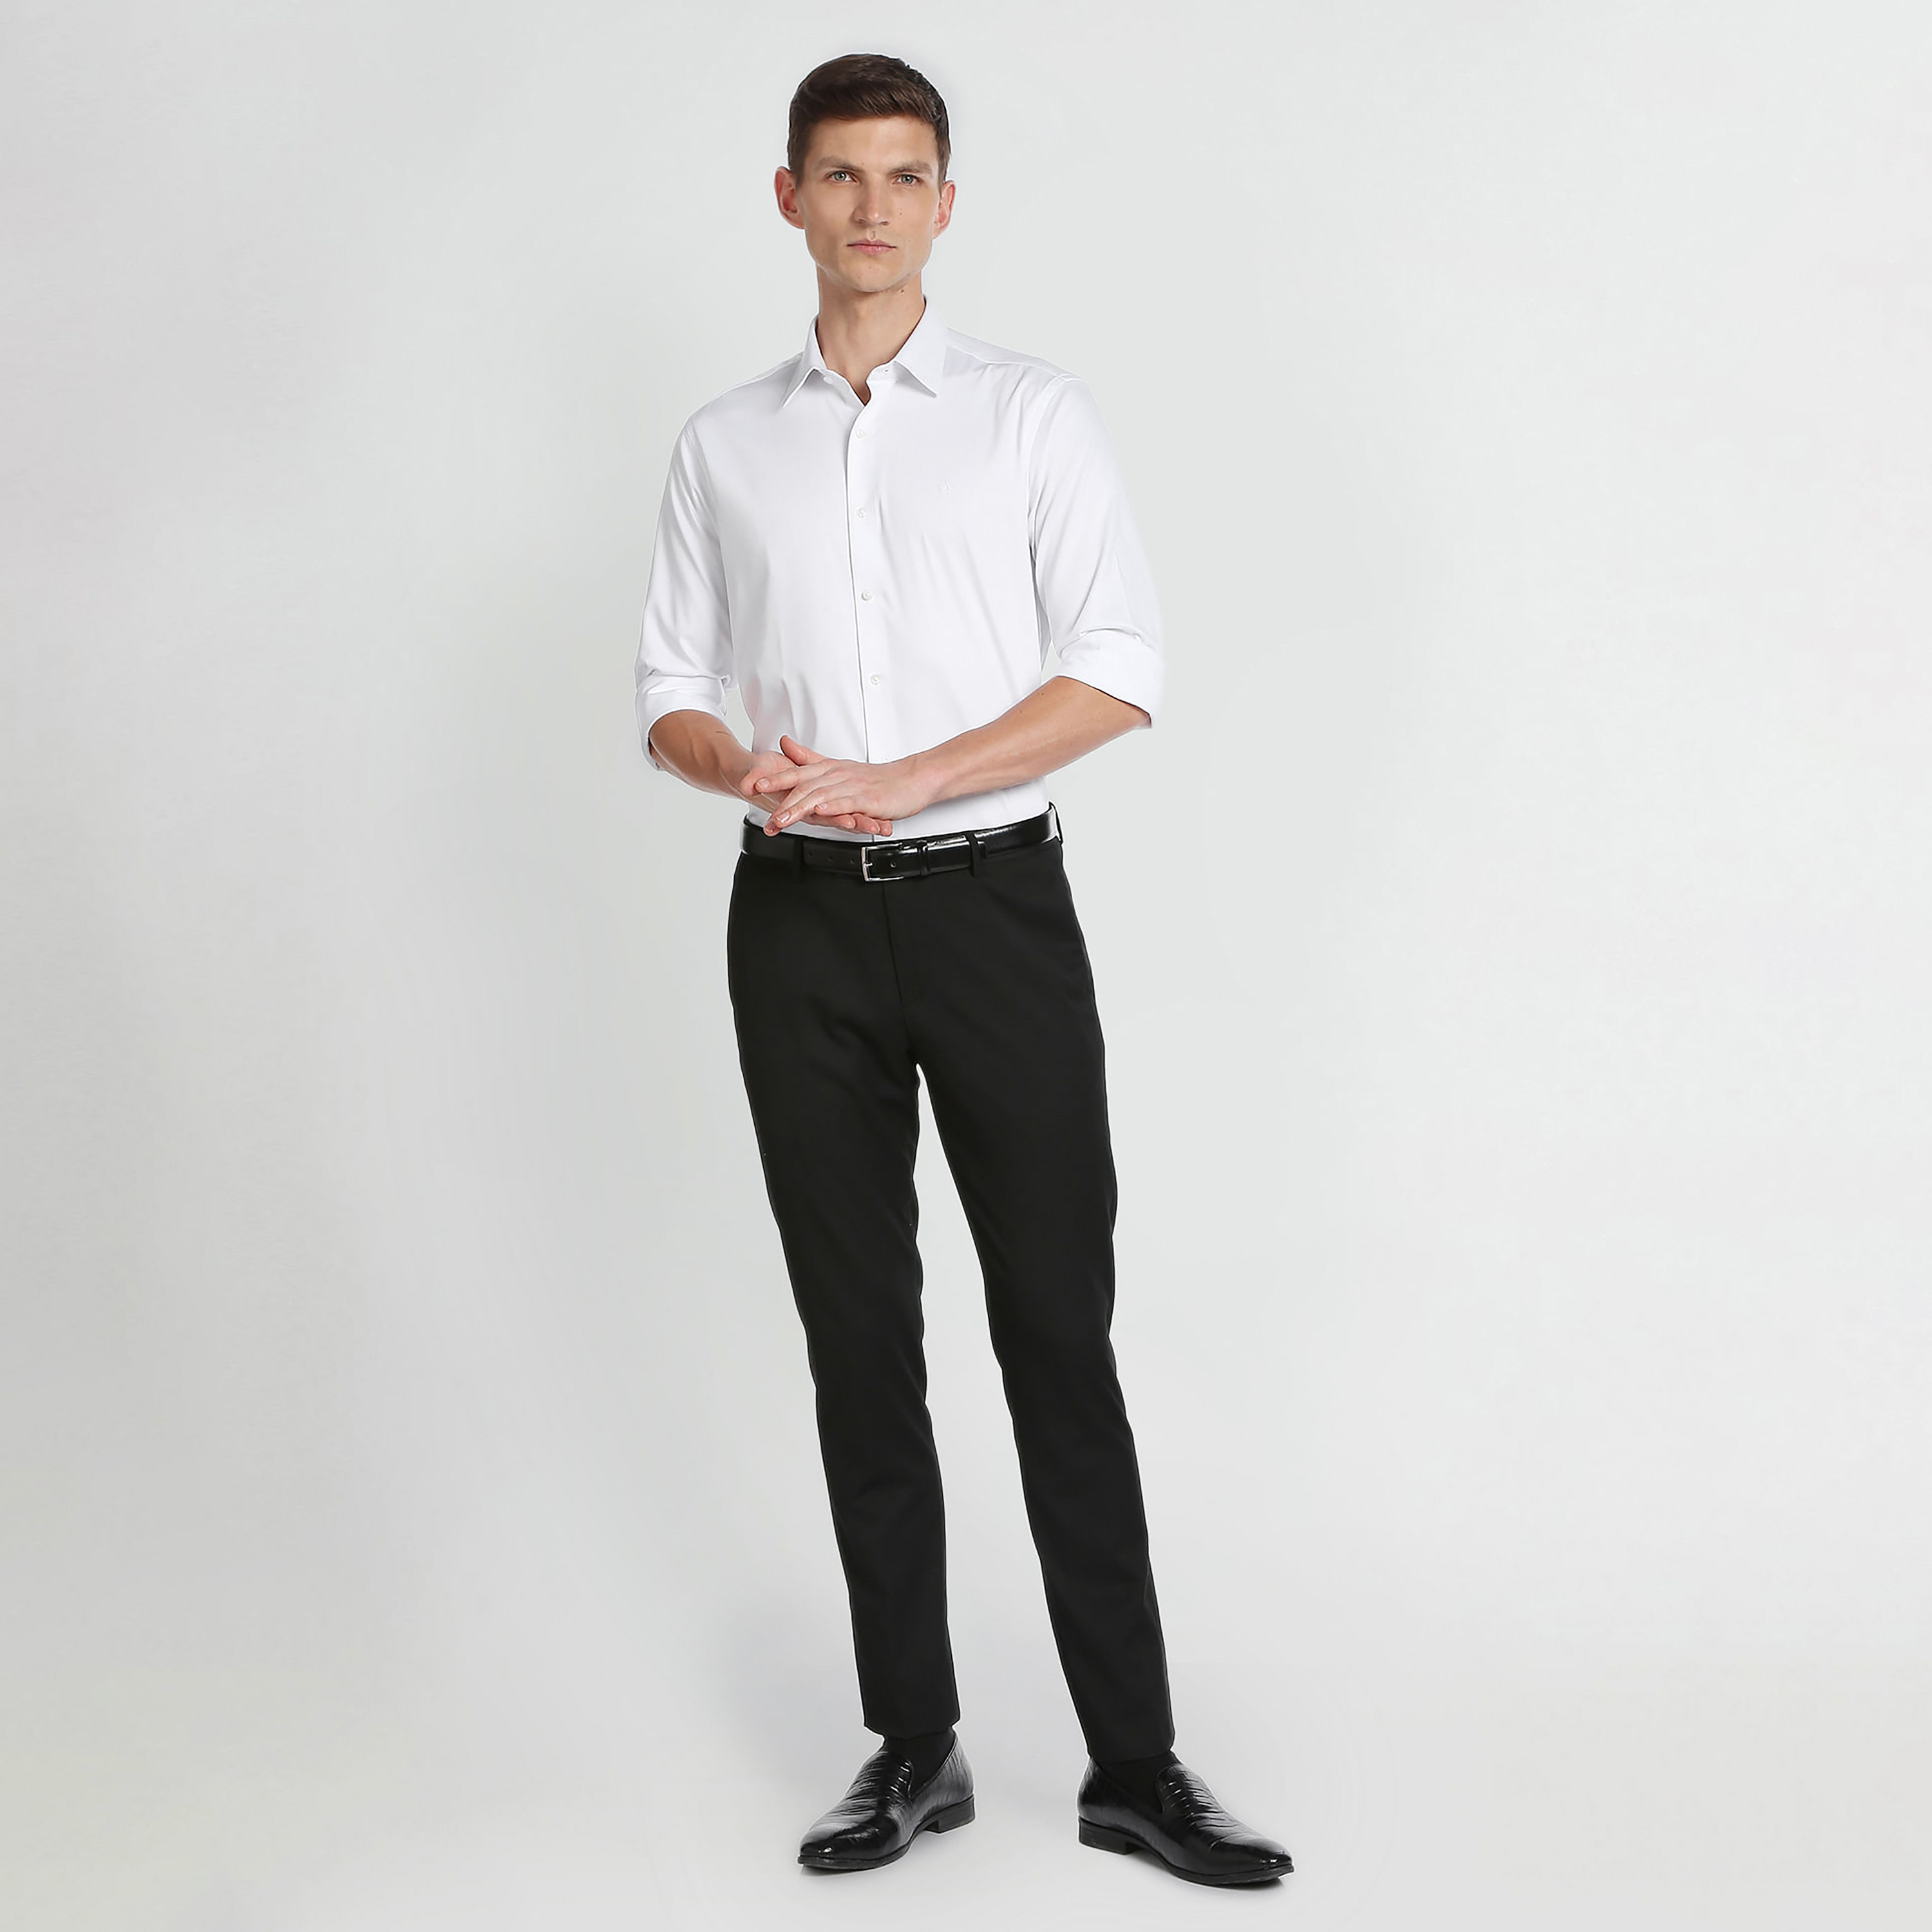 Buy Arrow Flat Front Striped Formal Trousers - NNNOW.com